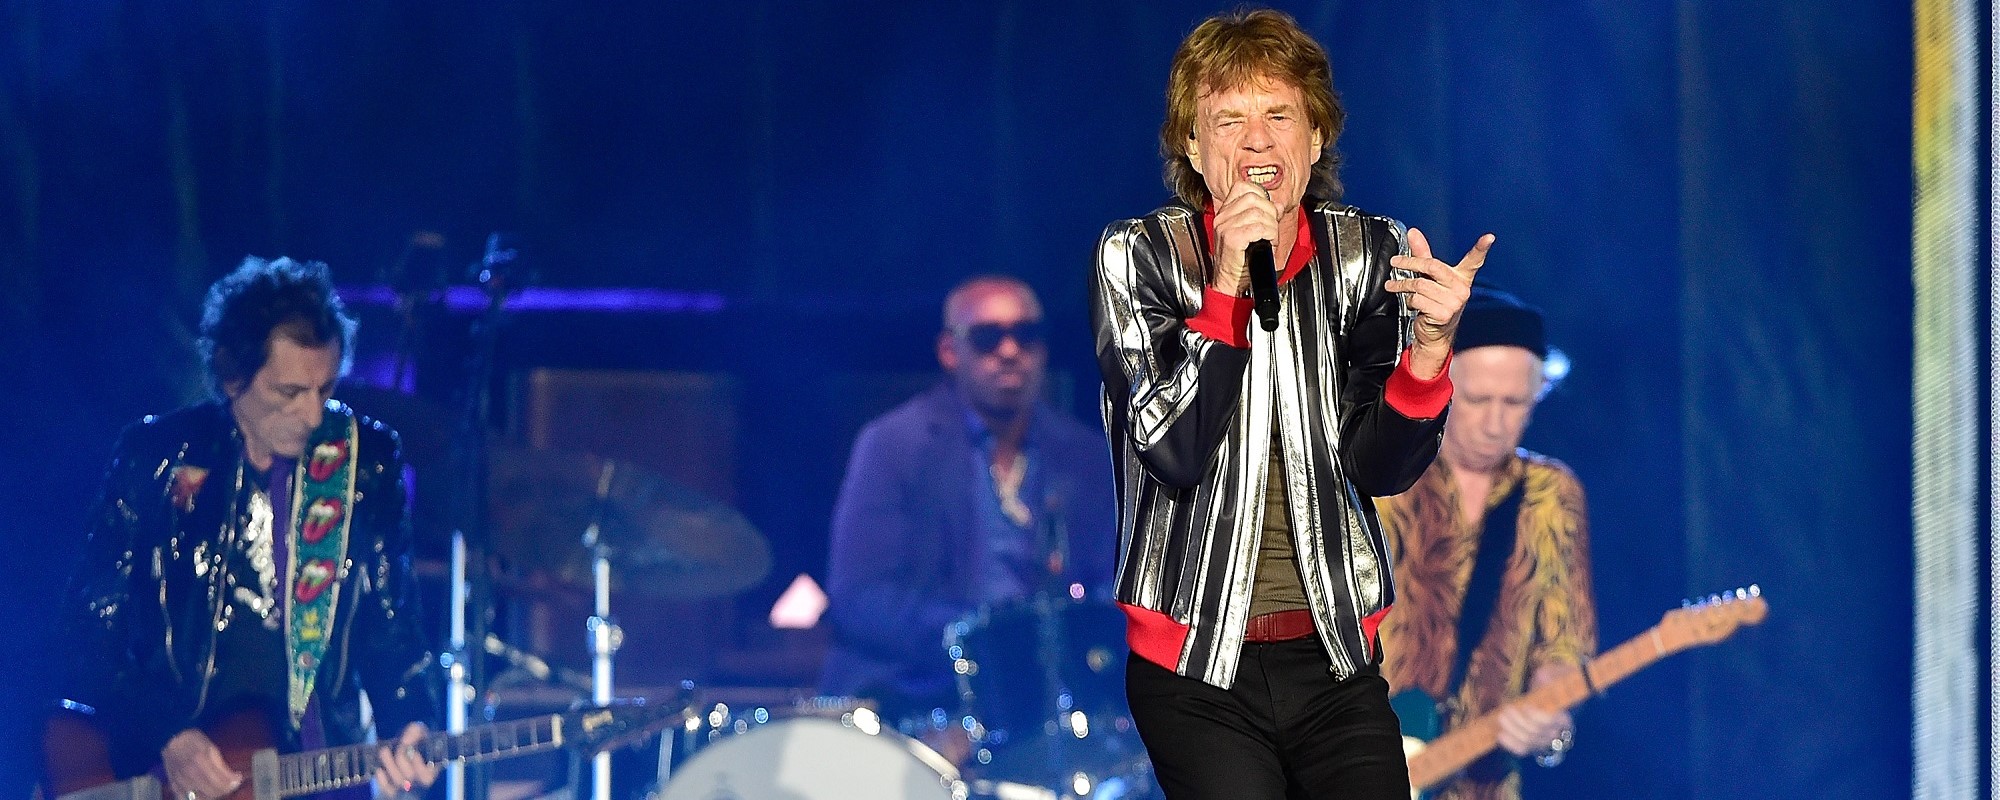 The Rolling Stones Give Three More Songs Their Tour Debut at Show in Glendale, Arizona